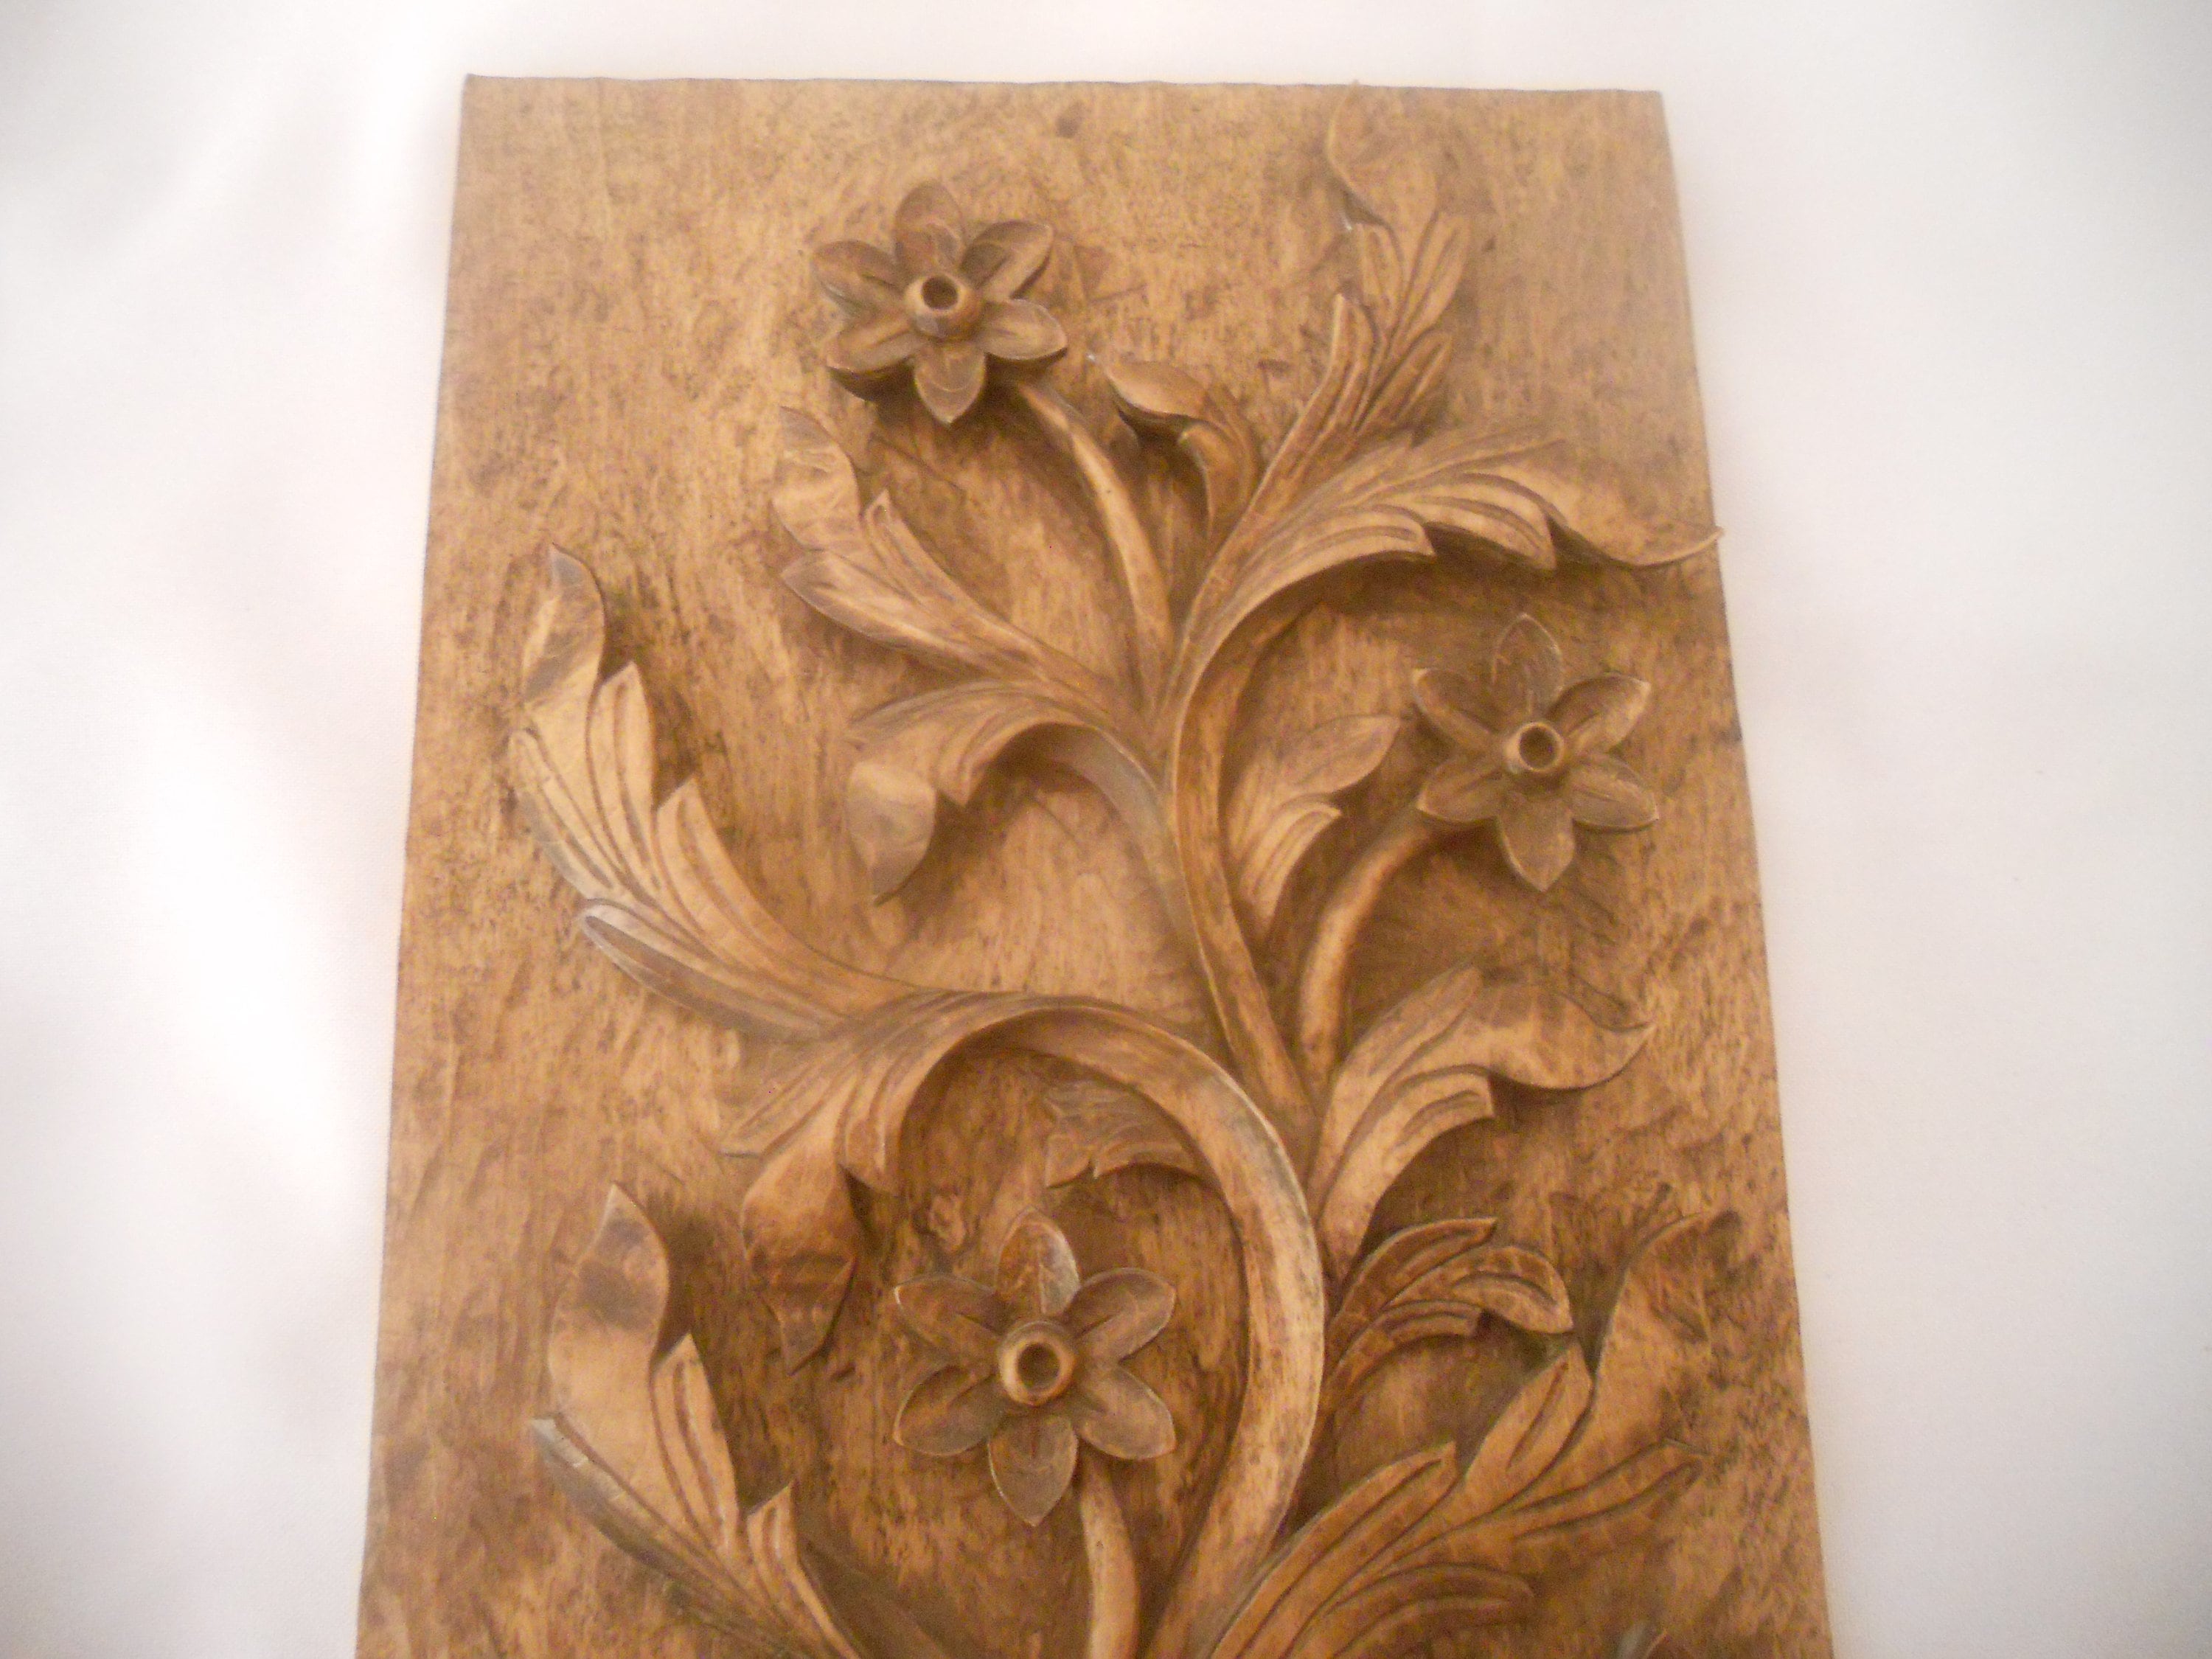 Hand-Carved Wooden Plaque Featuring a Maple-Leaf by Sayid Ghanbari